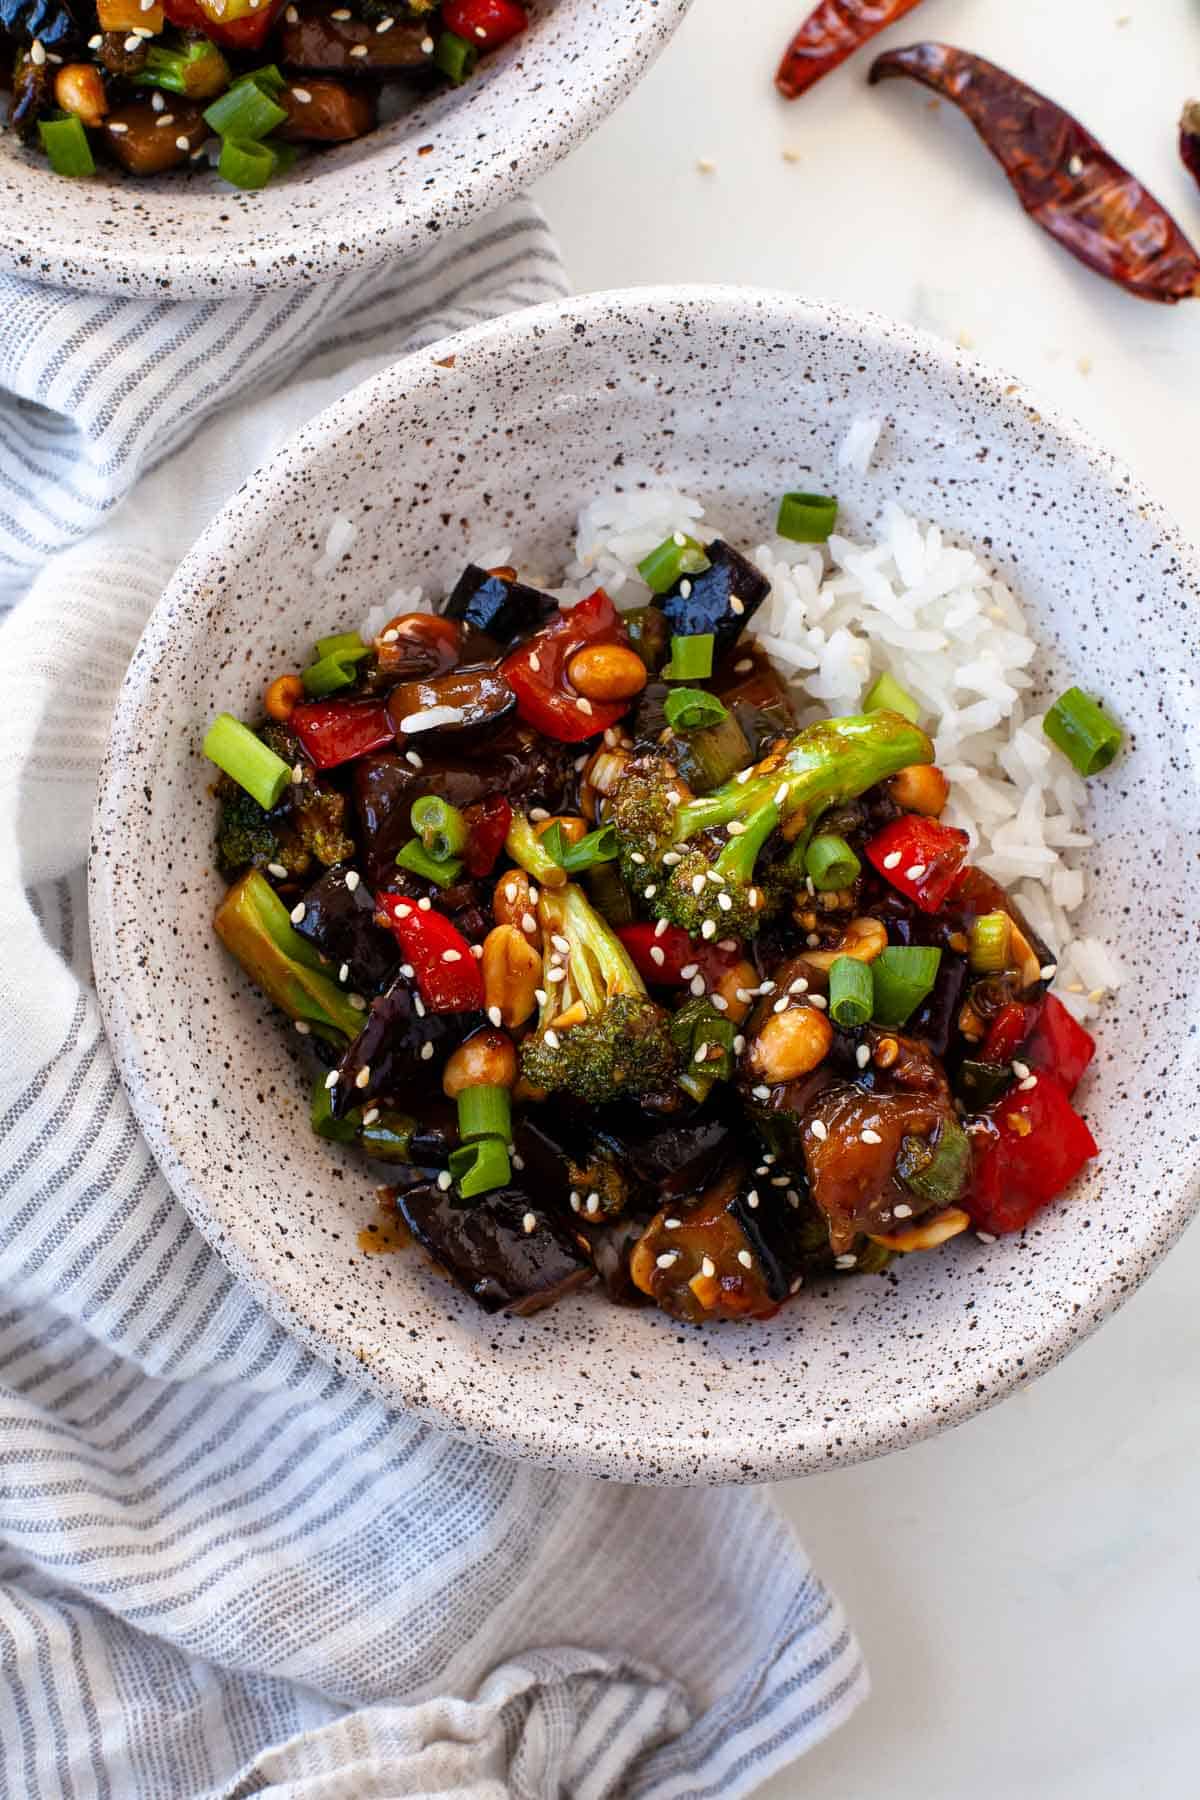 kung pao vegetables with rice in white speckled bowls, dried chilis, towel